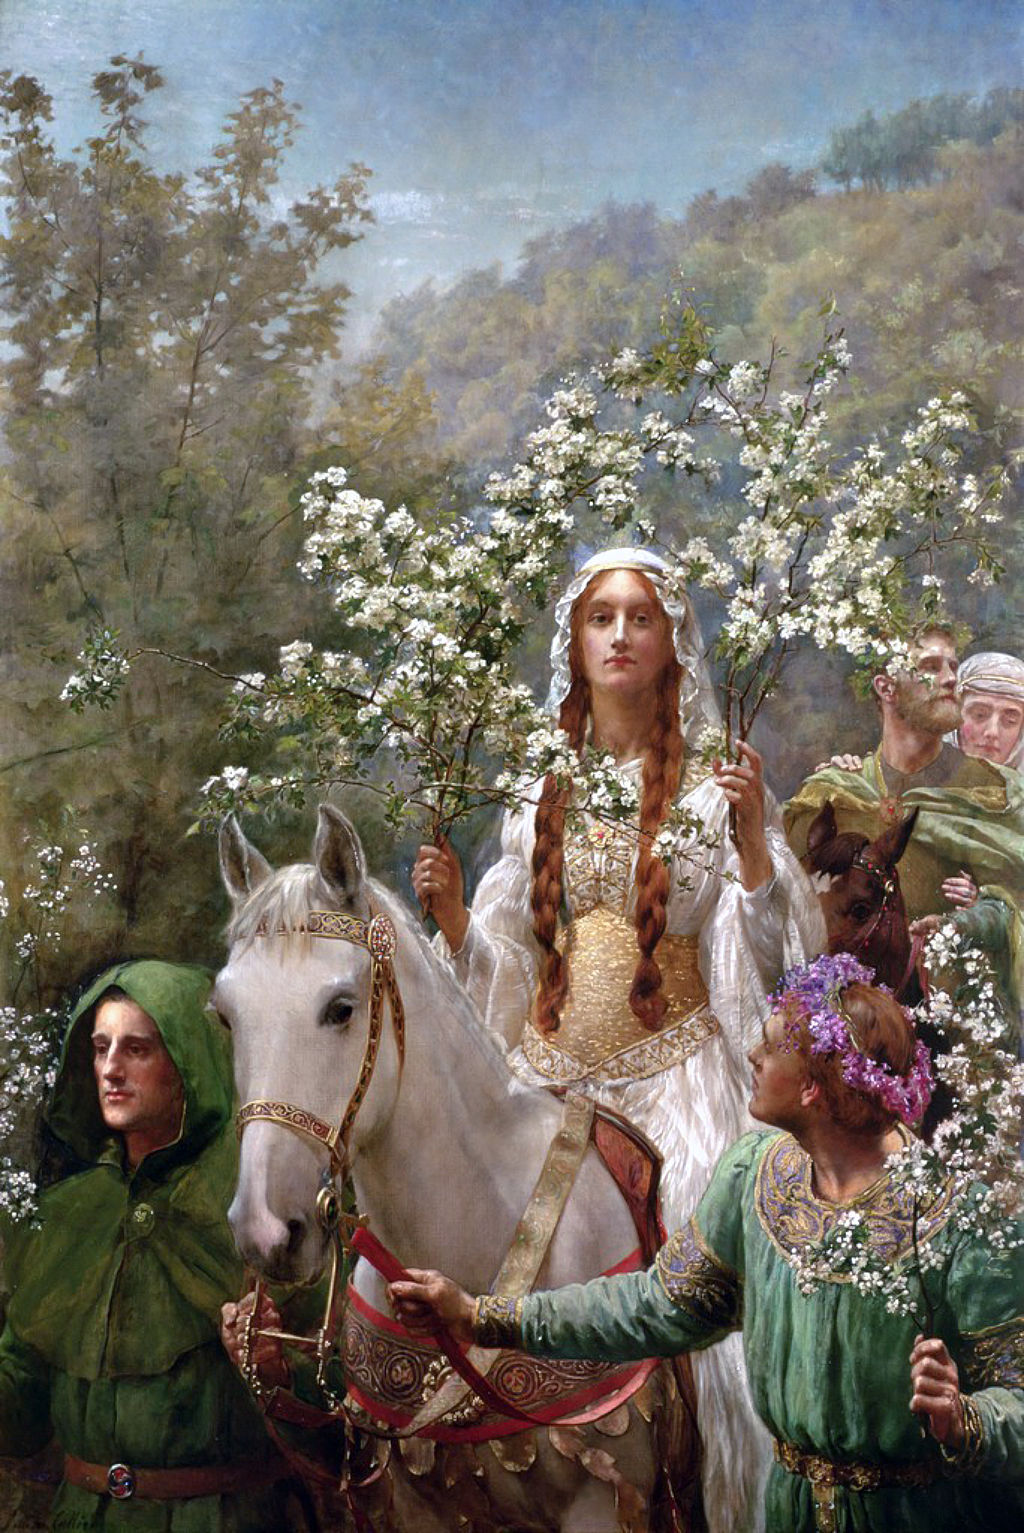 Inspiration: “Queen Guinevere’s Maying,” by John Collier